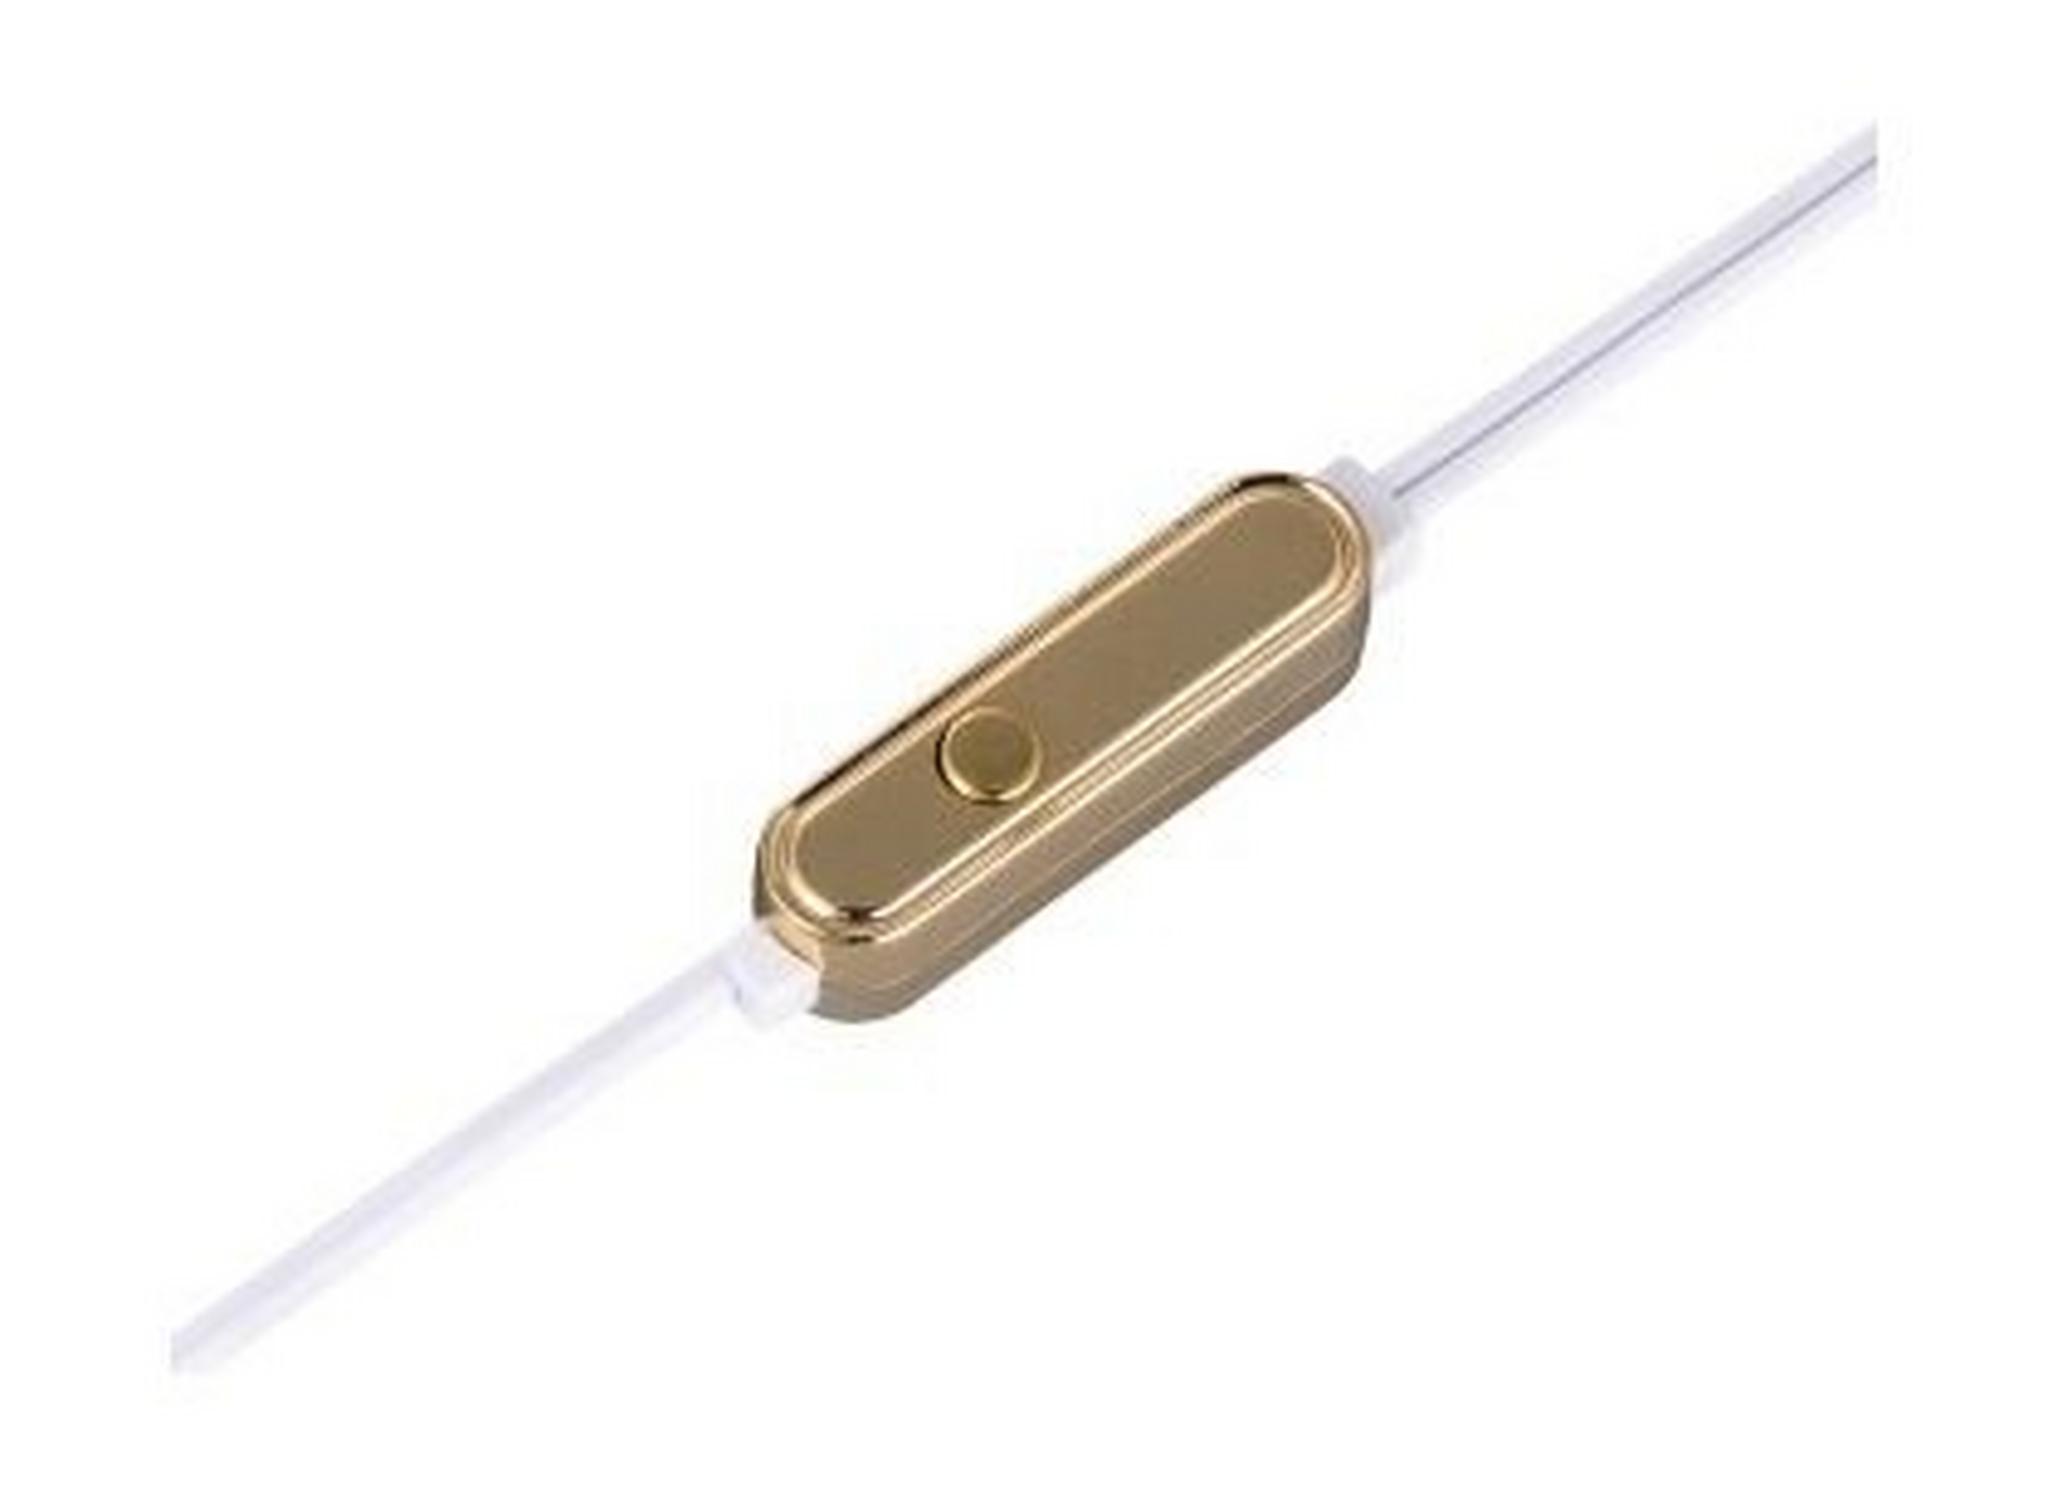 Thomson In-Ear Earphones with Microphone (EAR3005GD) – Gold